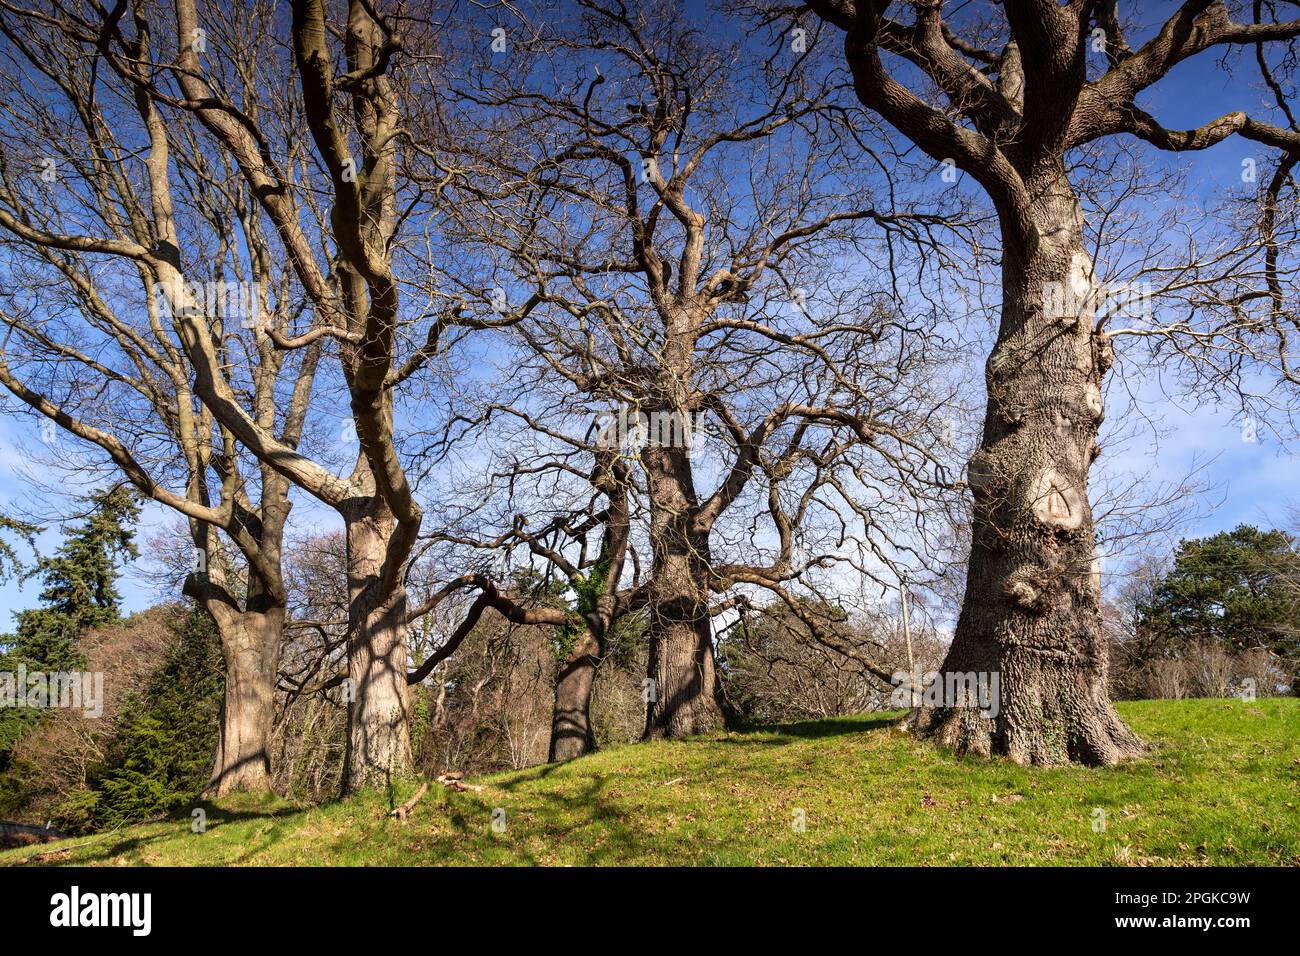 Copse of trees with bare branches in winter sunlight Stock Photo